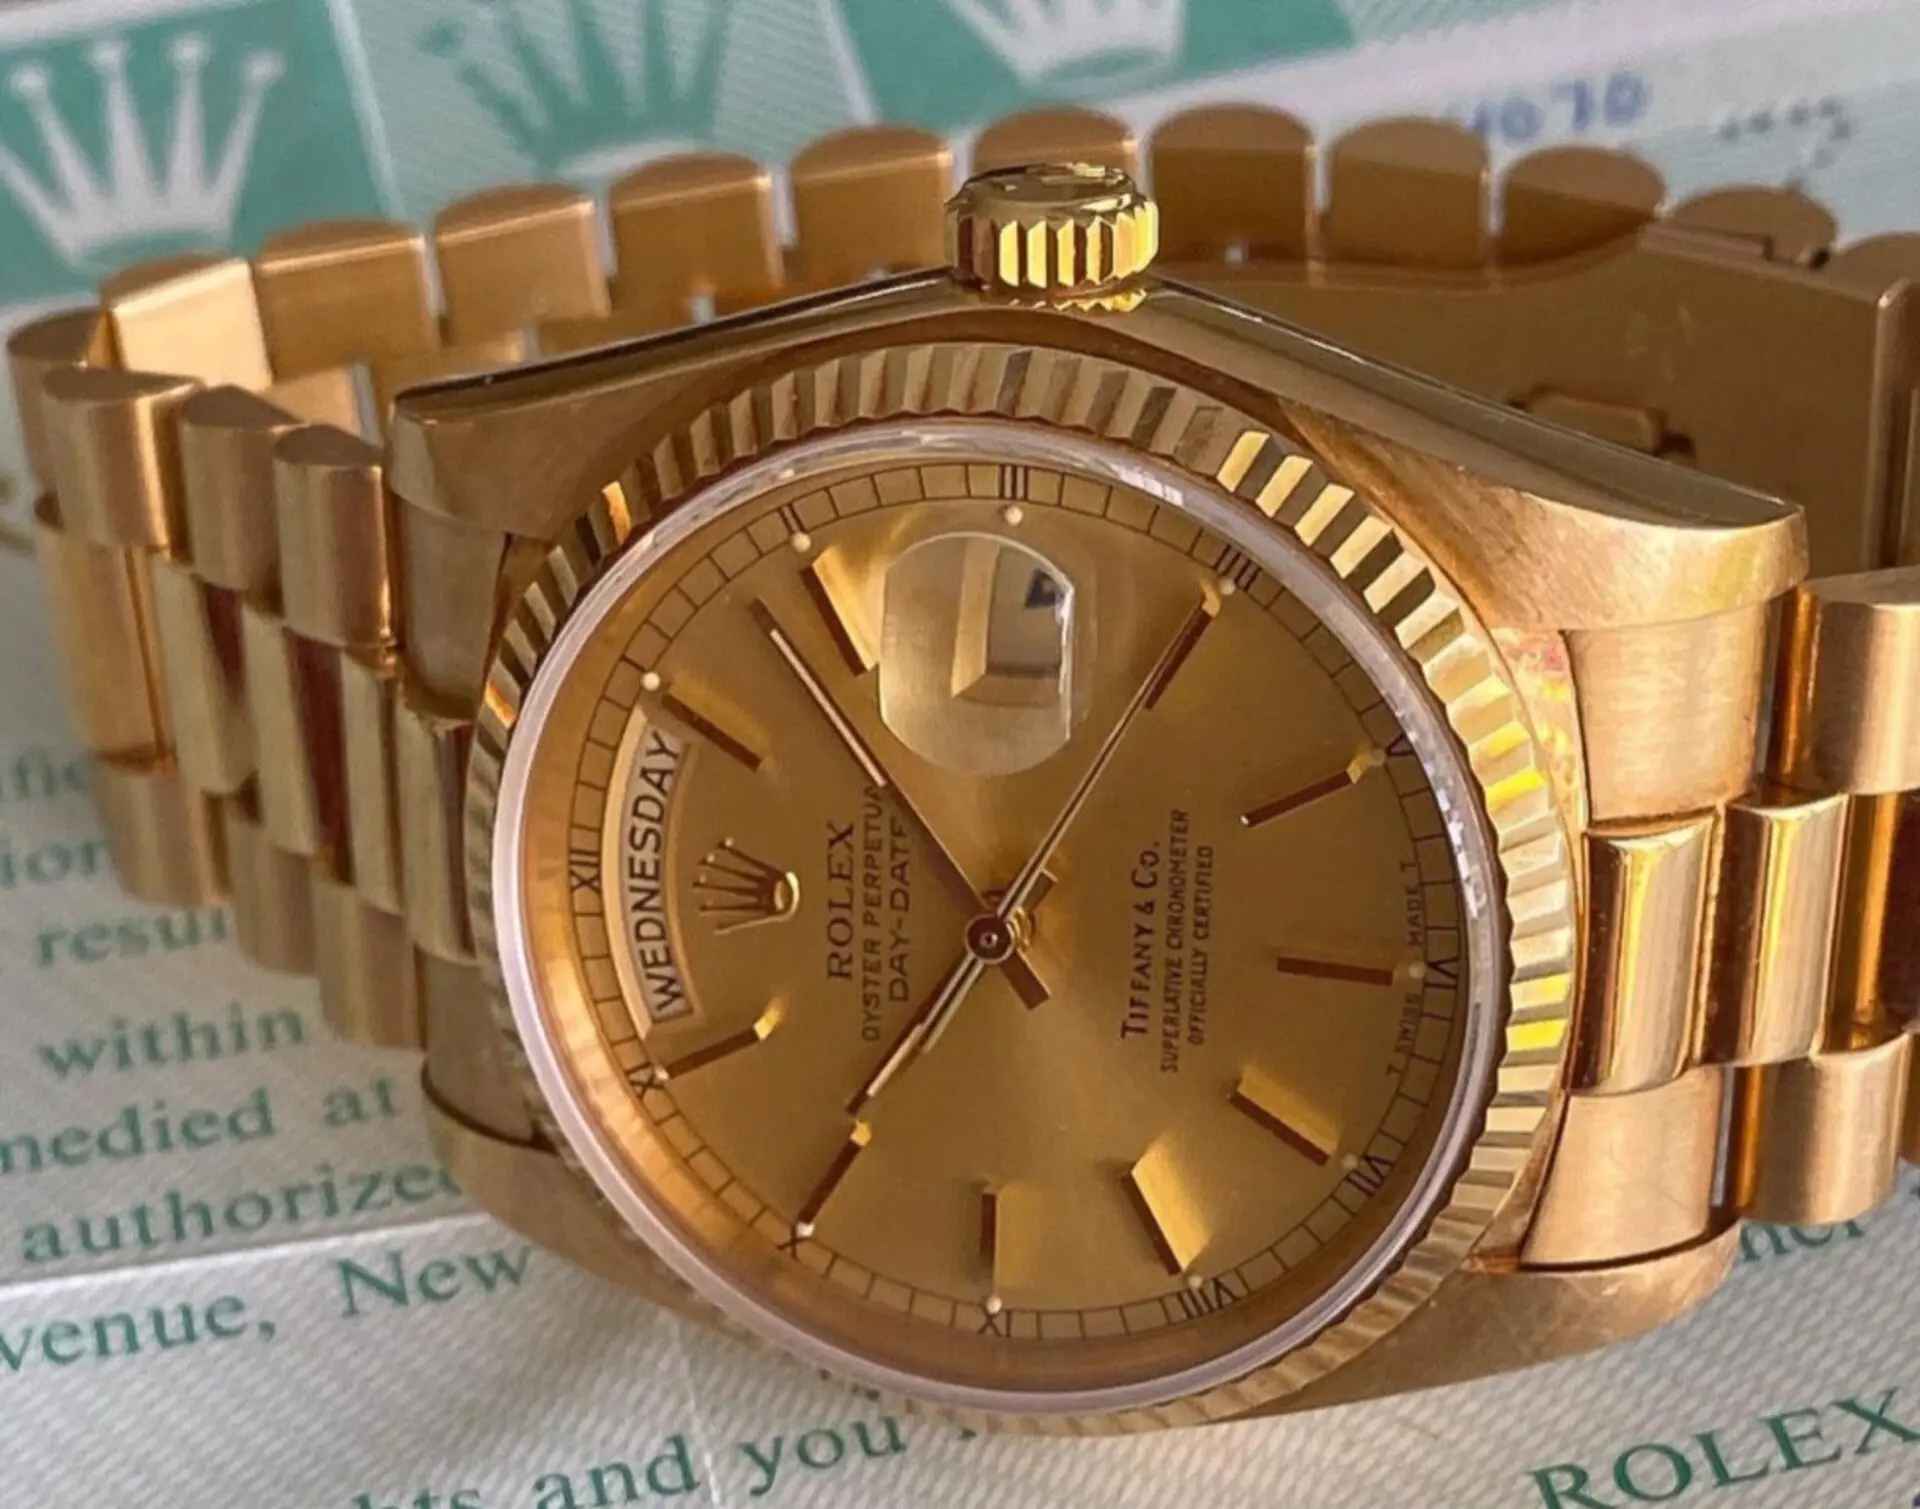 tapperhed Cyberplads Mutton This is why a gold Rolex is still the most divisive watch on earth